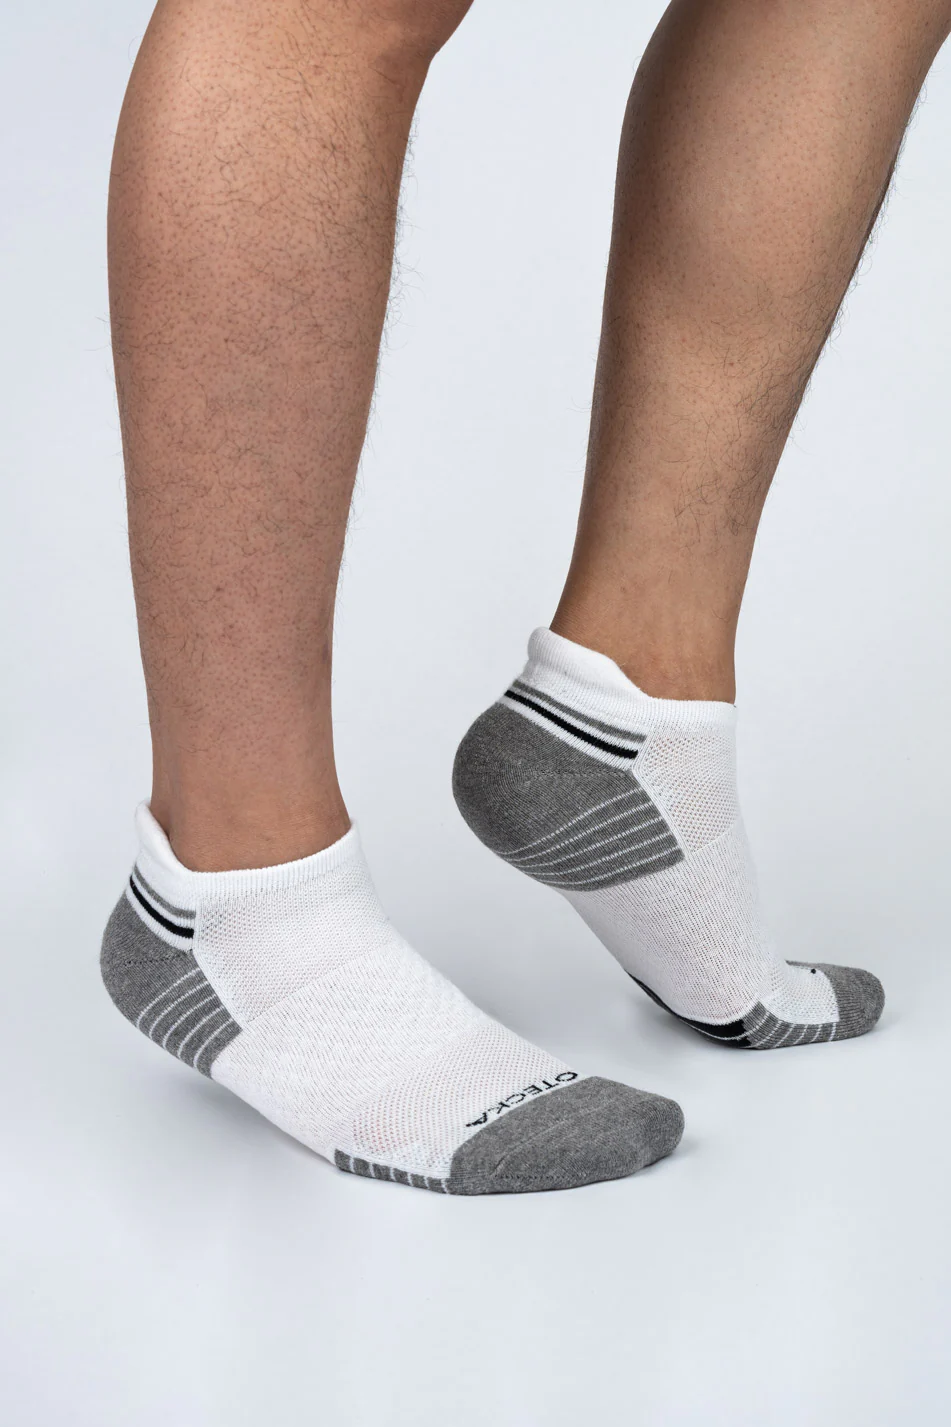 Step Up Your Style: Otecka's Women's Ankle Socks in Canada